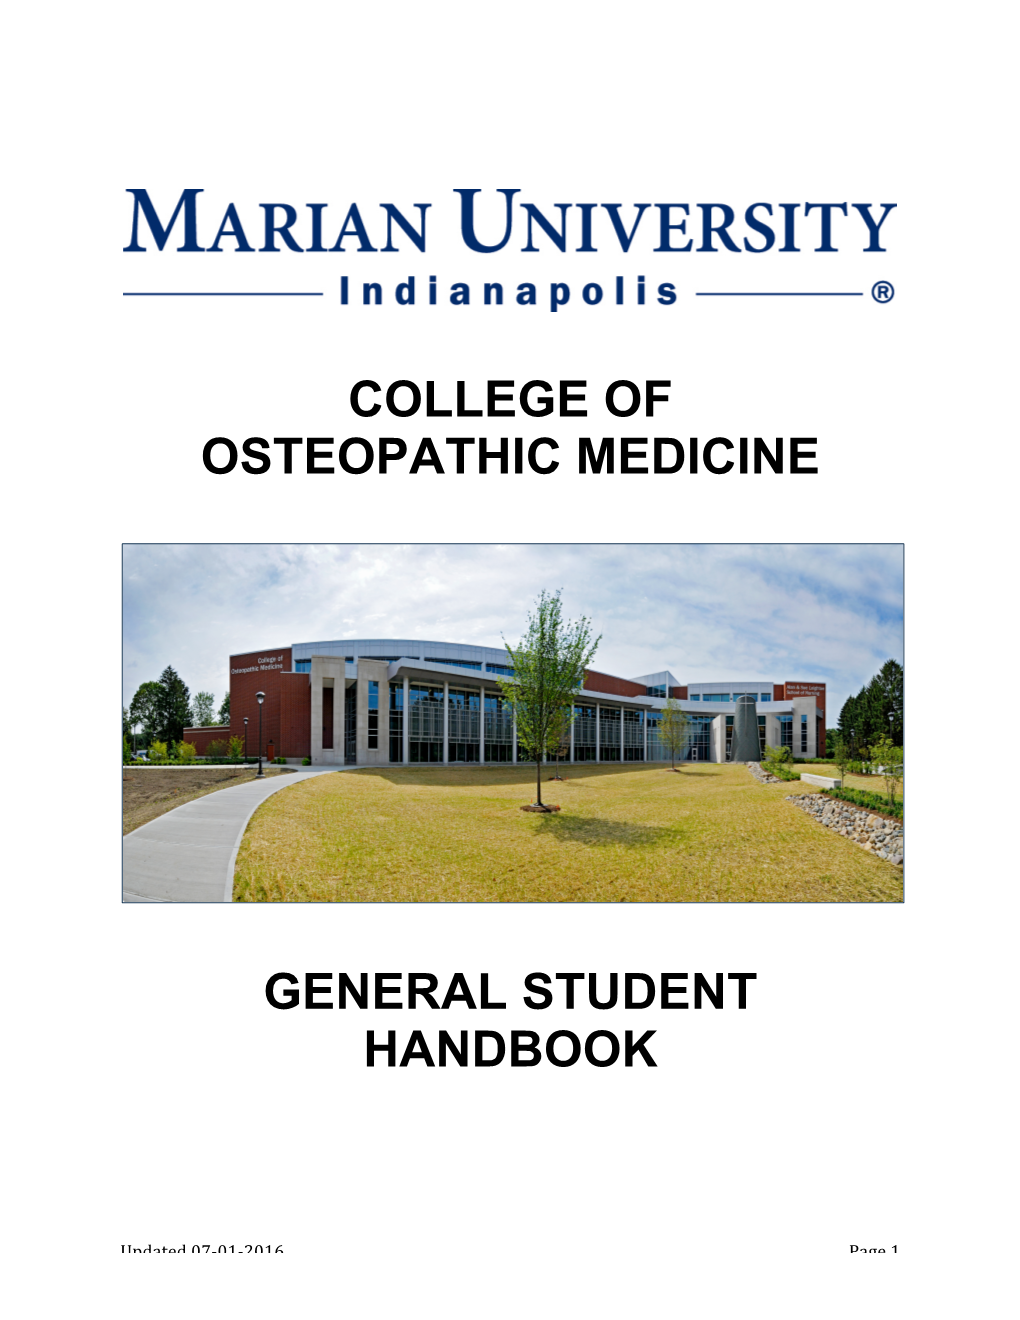 College of Osteopathic Medicine General Student